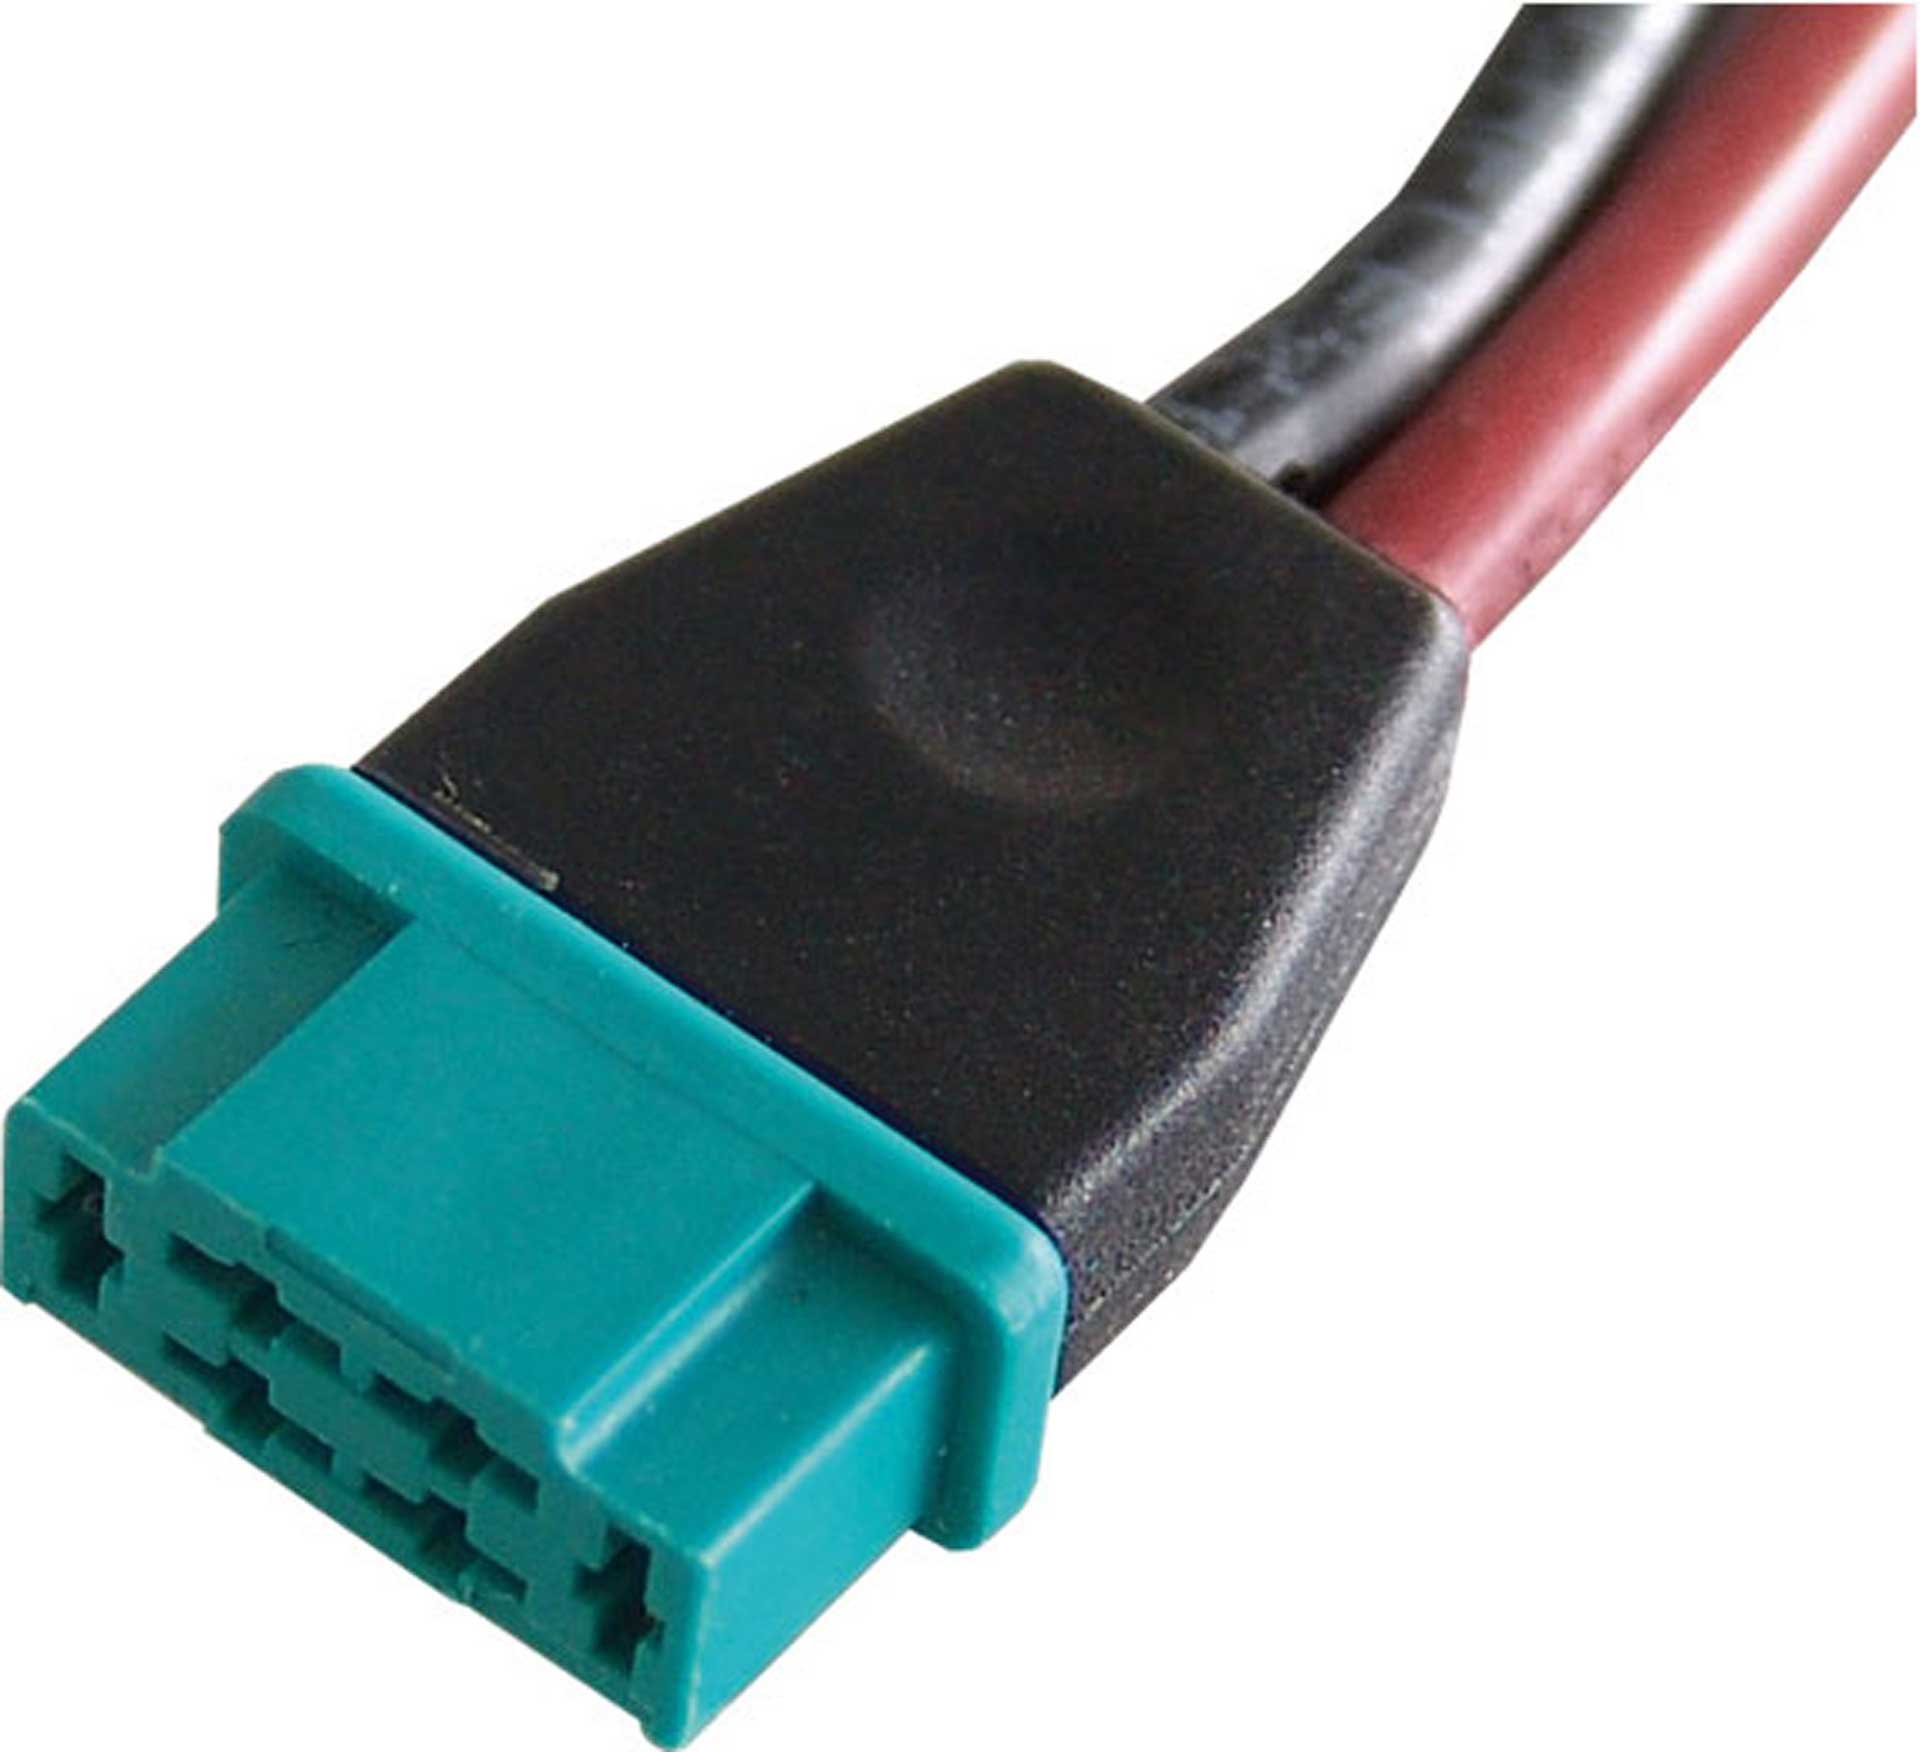 POWERBOX SYSTEMS MULTIPLEX-PIK SOCKET 2,5MM² 30CM WITH CABLE